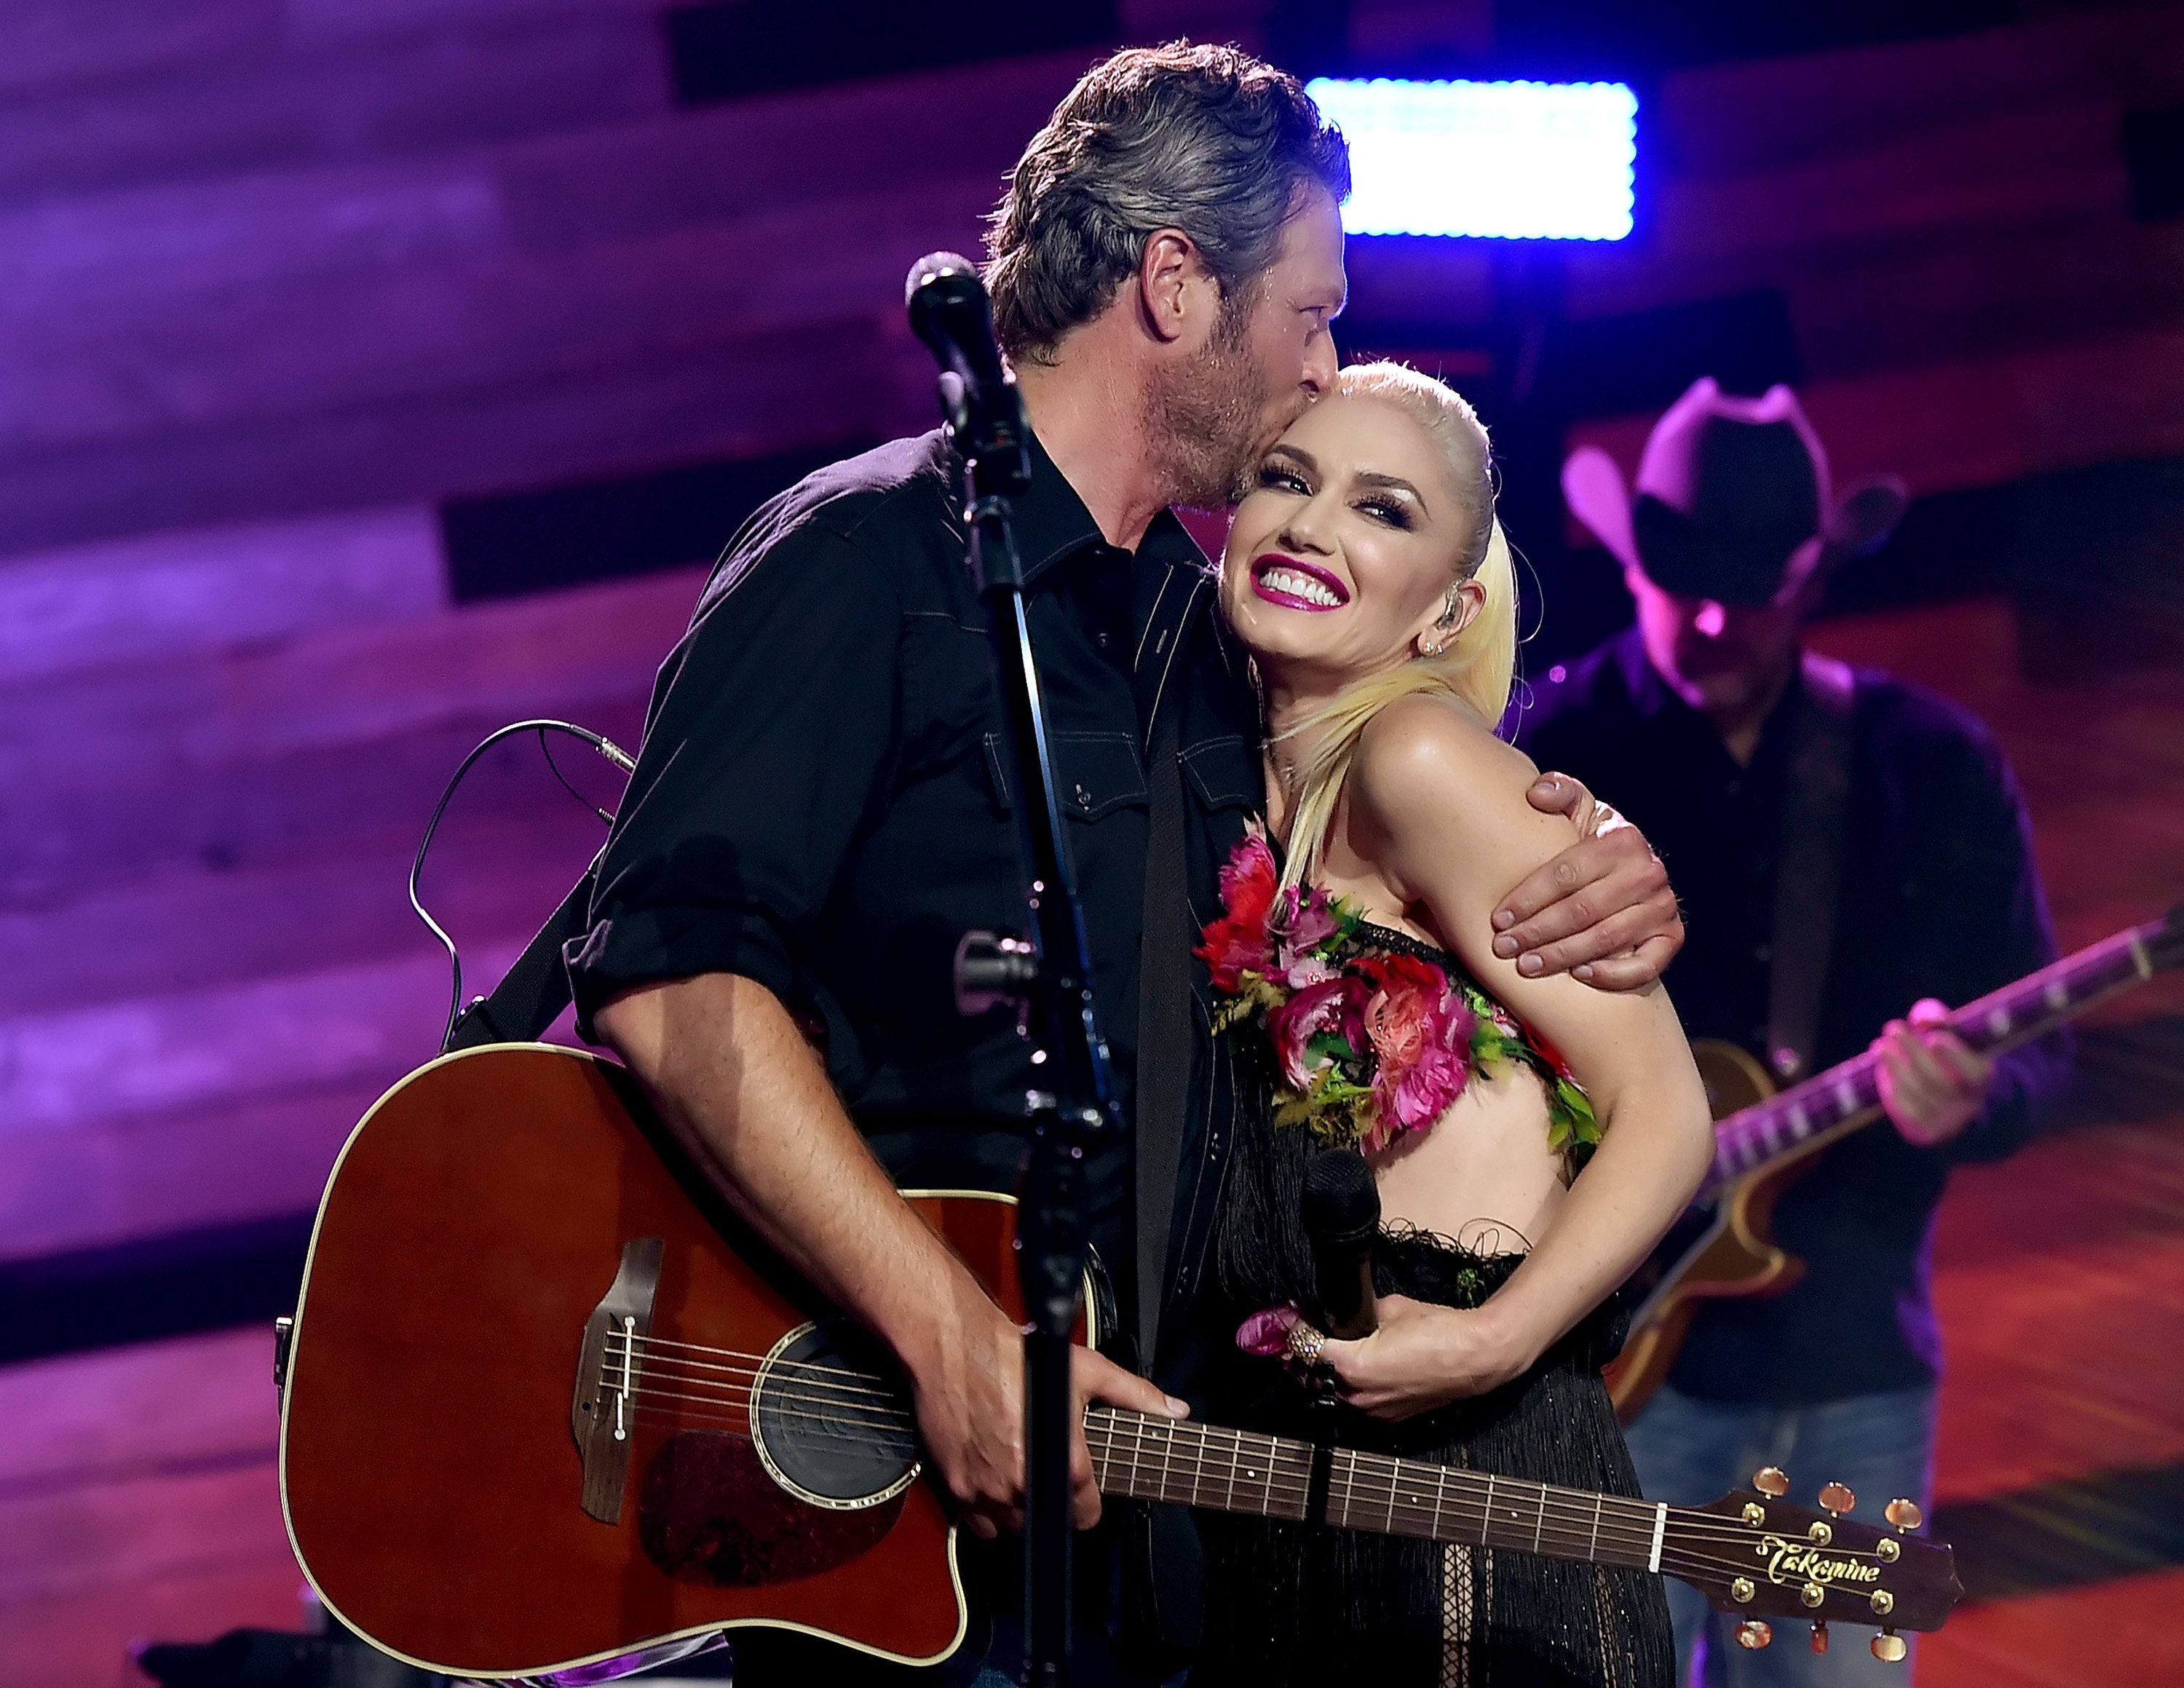 Blake Shelton and Gwen Stefani performing on the Honda Stage at the iHeartRadio Theater, 2016, Burbank, California. | Photo: Getty Images